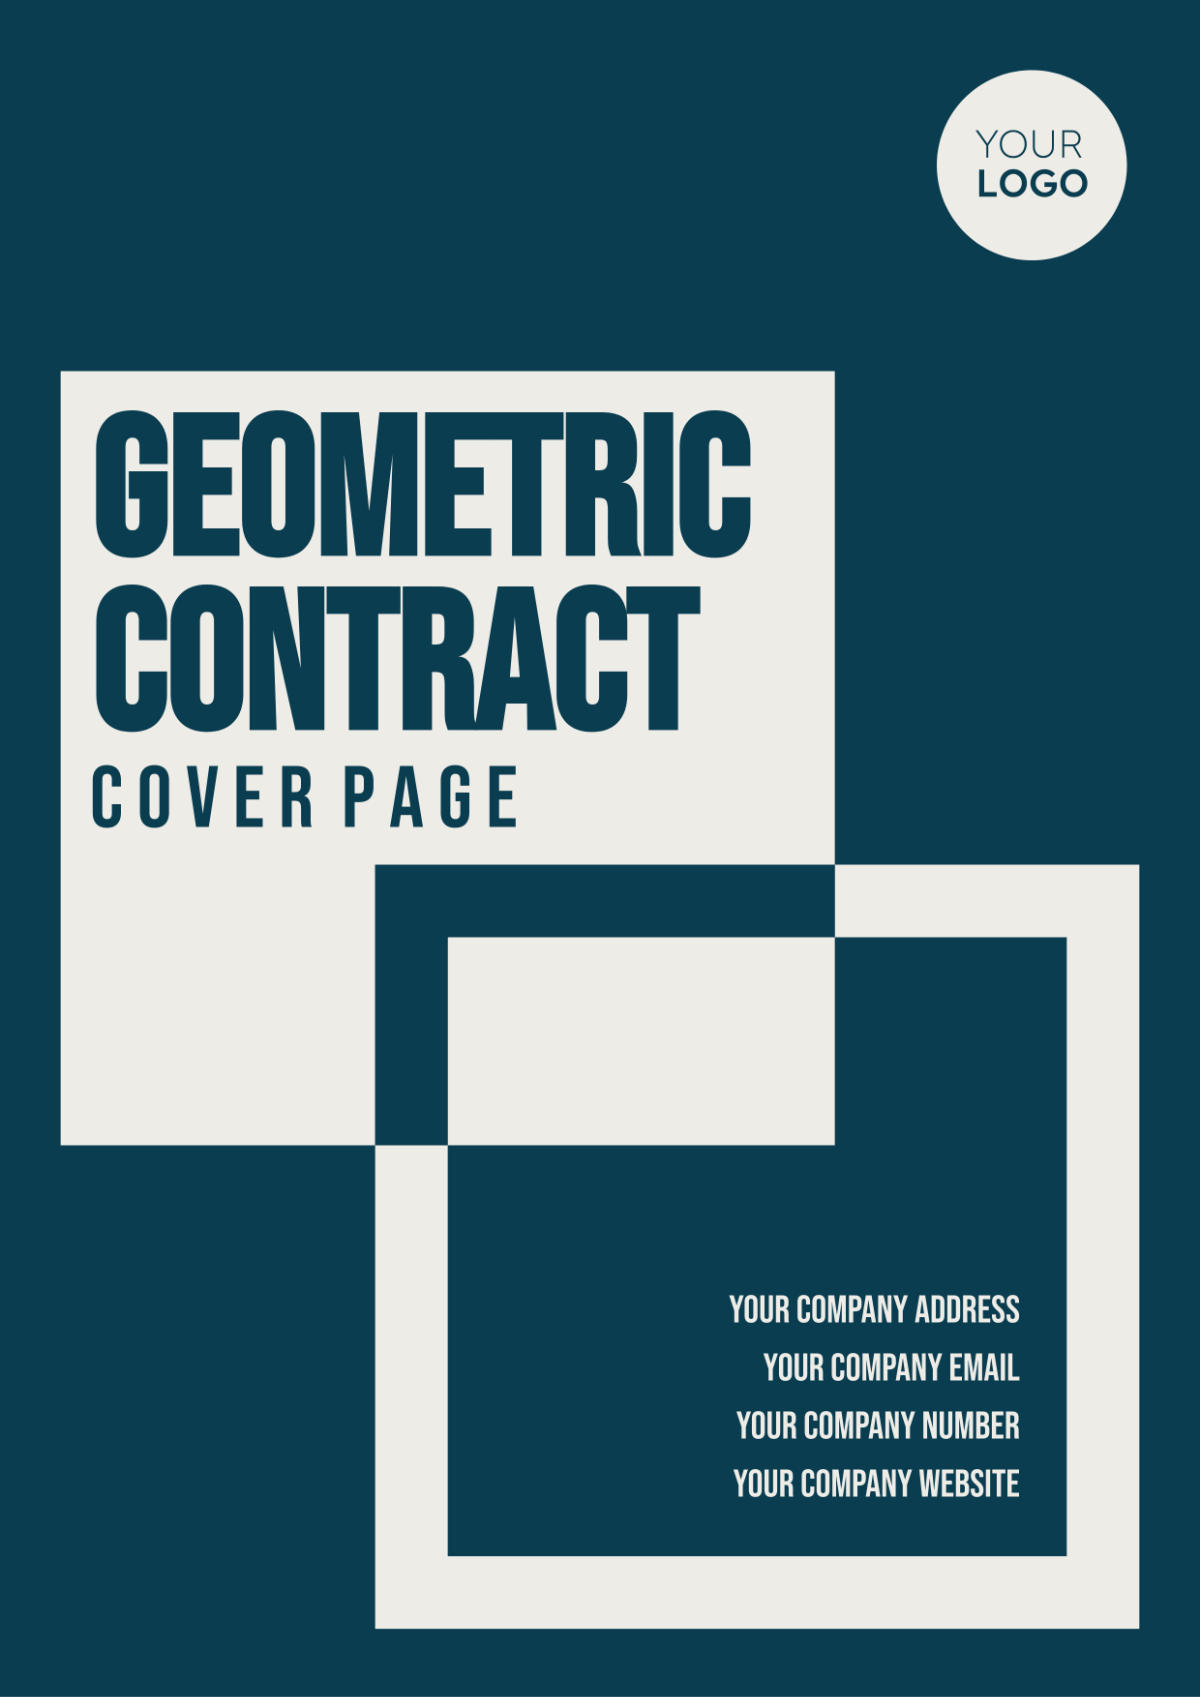 Geometric Contract Cover Page